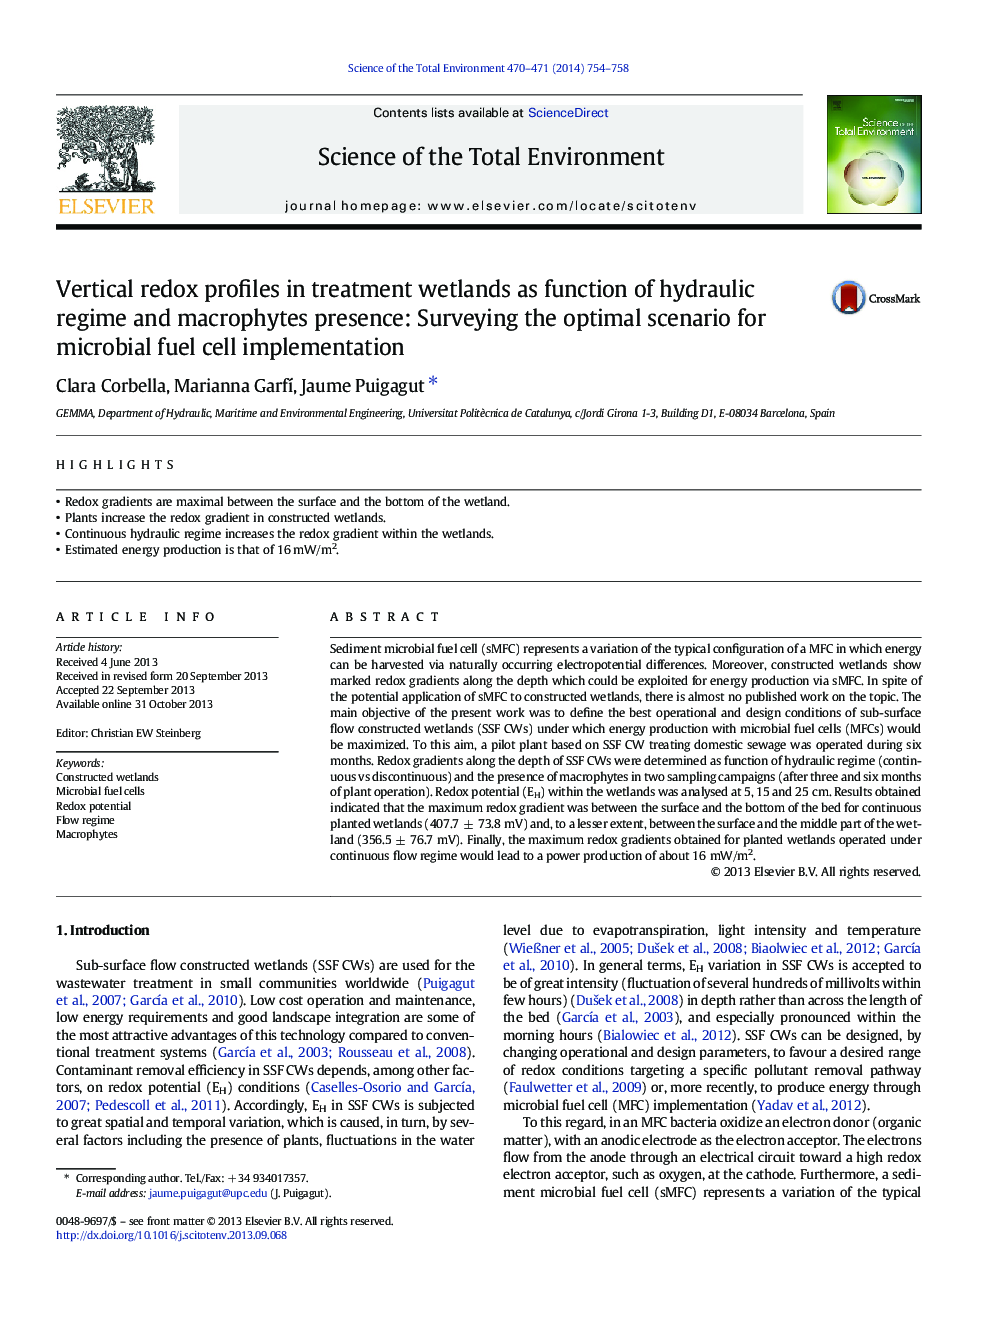 Vertical redox profiles in treatment wetlands as function of hydraulic regime and macrophytes presence: Surveying the optimal scenario for microbial fuel cell implementation